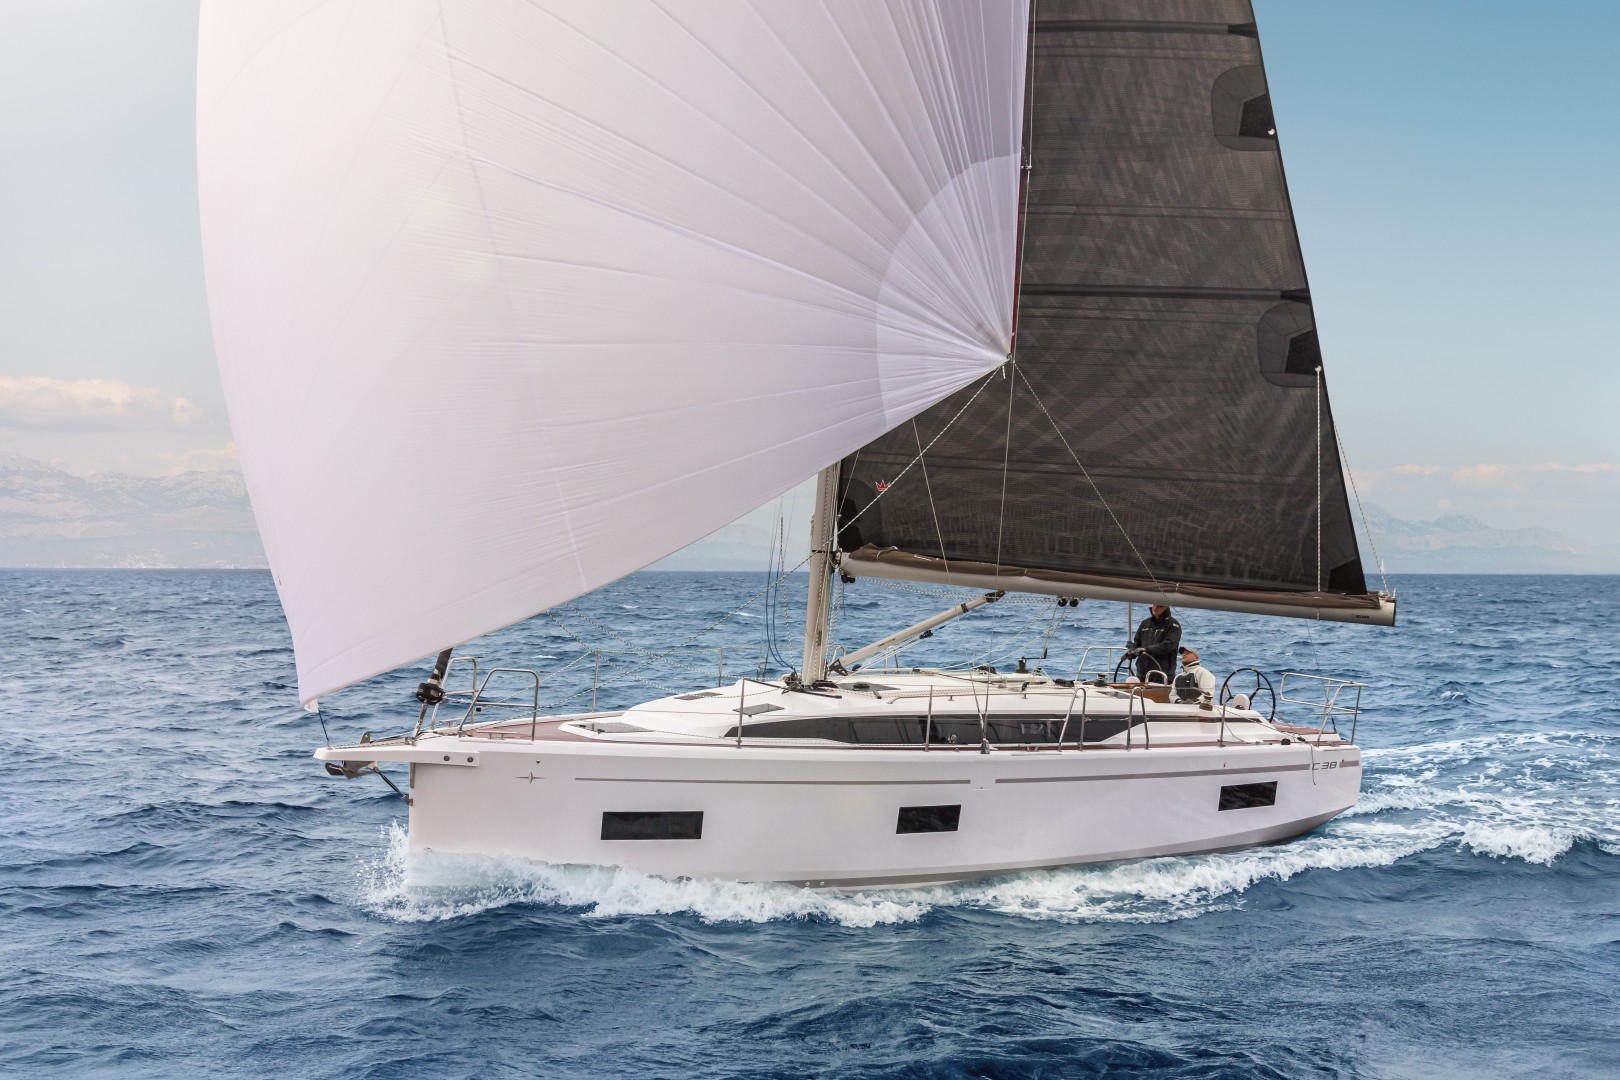 This summer’s big launch from Bavaria is the Cossutti-designed C38 which follows the highly successful formula of last year’s multi-award winning C42. It marks a very welcome return to balanced hull forms in the production cruiser market and offers sailing sensations akin to a much more expensive Italian or Scandinavian performance cruiser